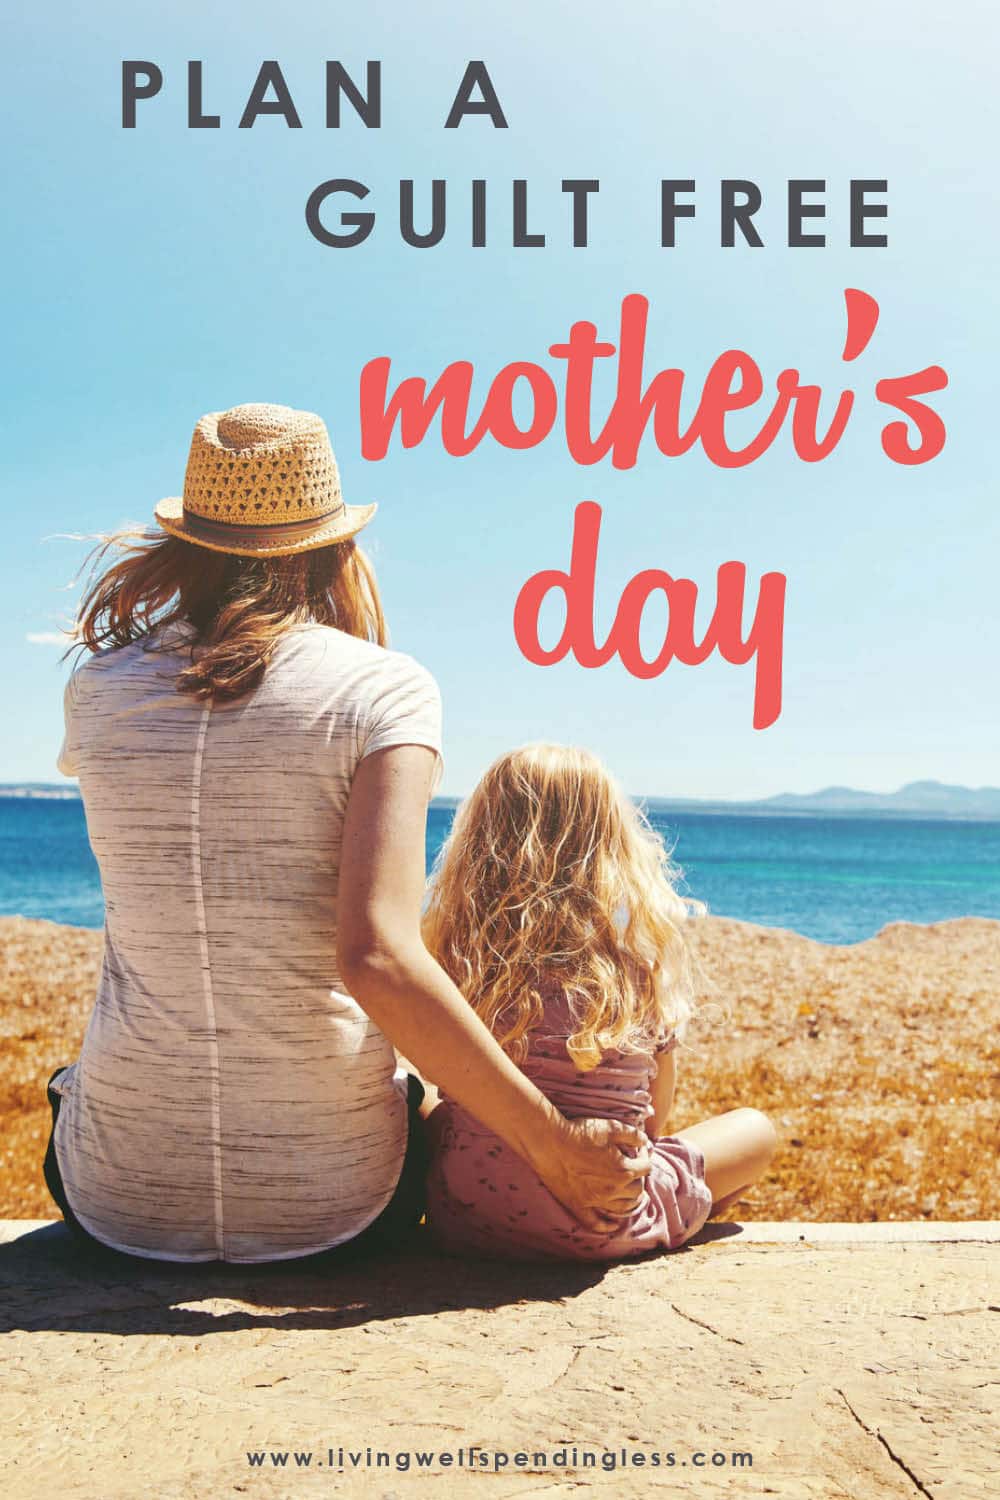 Mother’s Day is YOUR day – and you deserve to be celebrated! So don’t feel guilty for enjoying some self-love! And if you need some ideas on what to even do, don't miss these awesome tips for planning your own guilt-free Mother’s Day! You deserve it. #mothersday2020 #mothersday #mothersdayideas #selfcare #momlife #wifelife #mompreneur #momsdayout